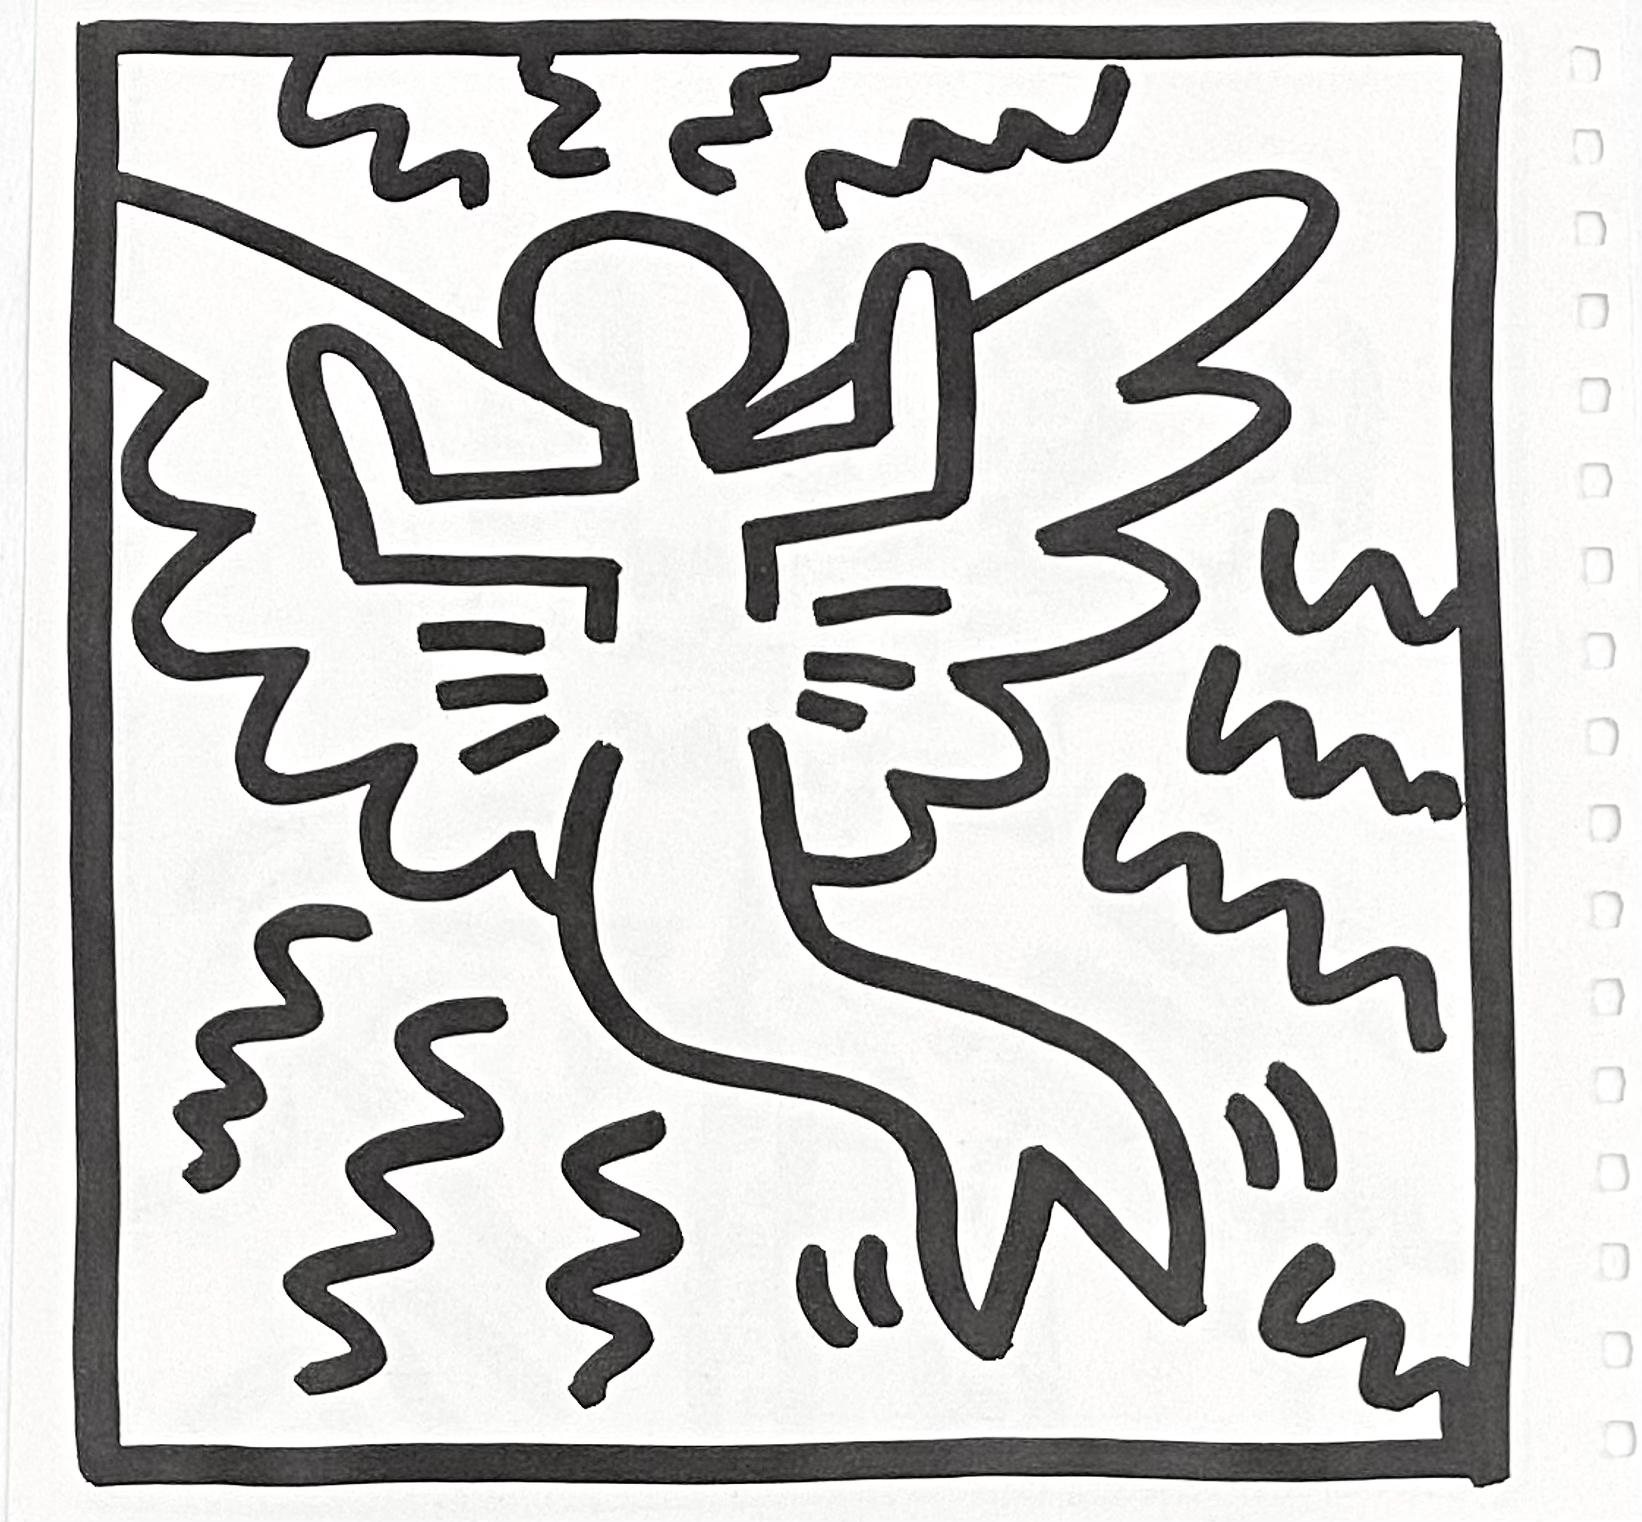 Keith Haring (untitled) angel lithograph 1982 (Keith Haring prints) - Print by (after) Keith Haring